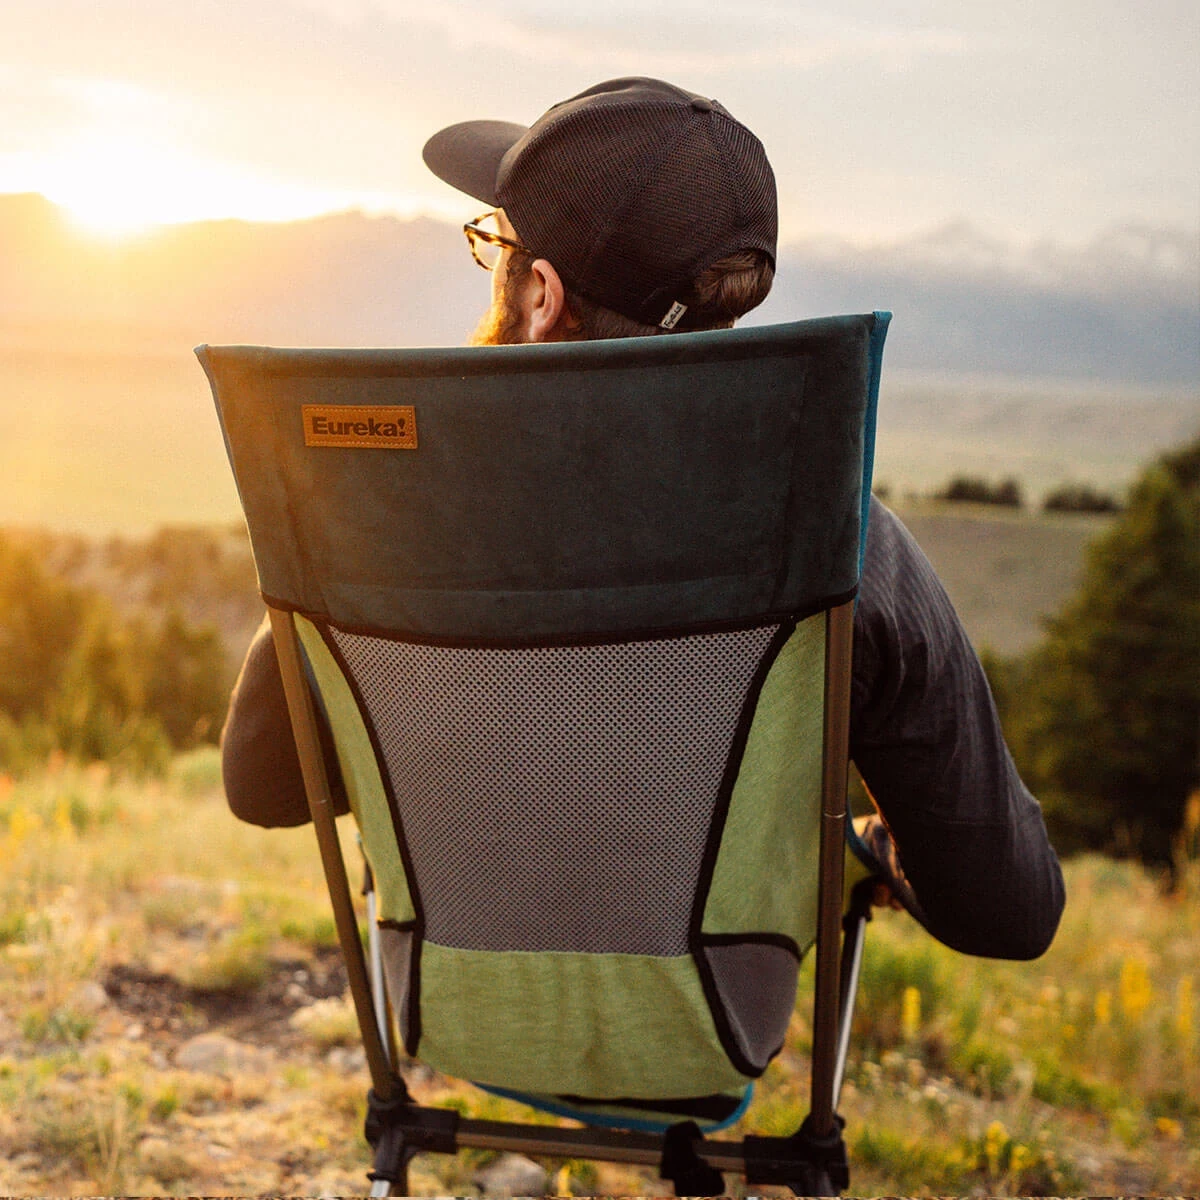 Relaxing in Eureka! Tagalong Comfort Camp Chair enjoying the outside view